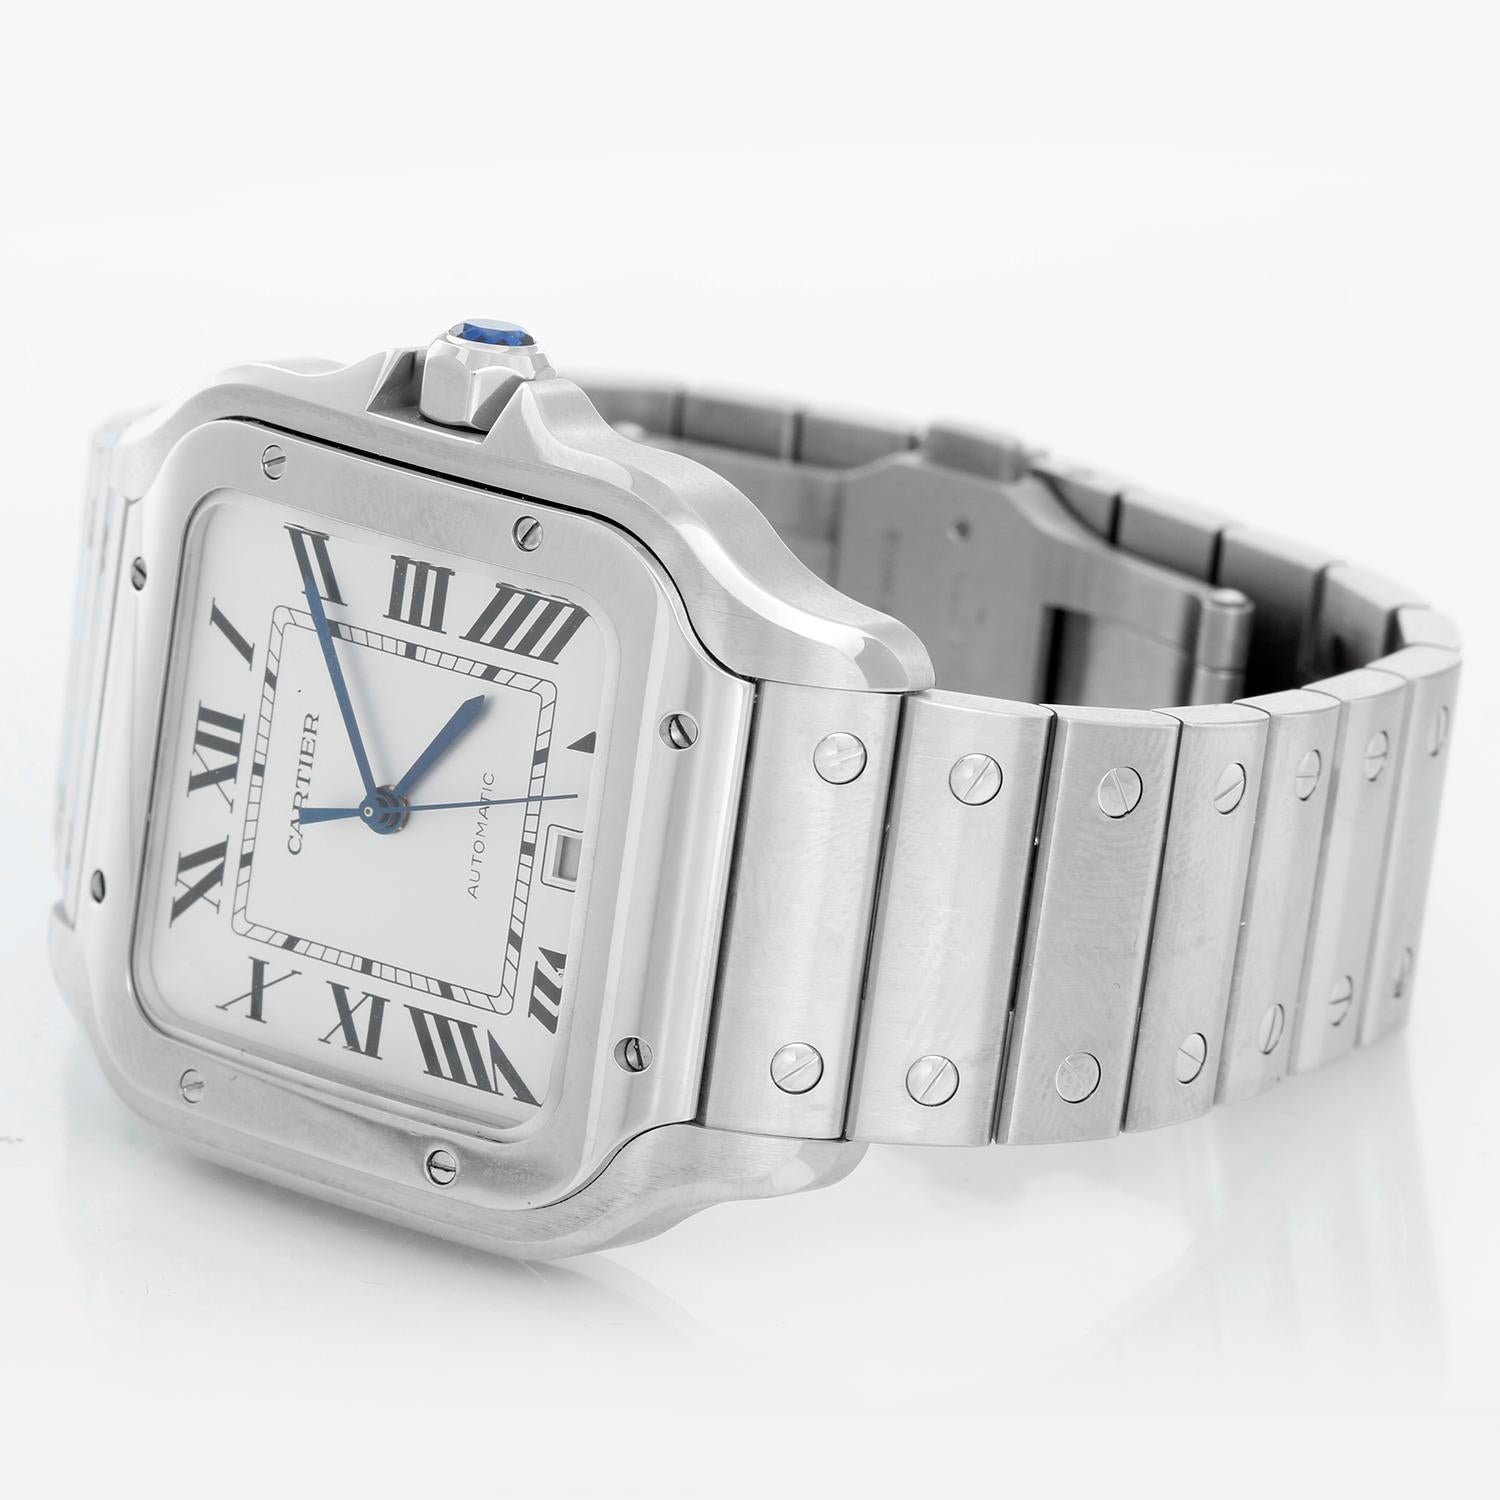 Cartier Santos Large  Men's Stainless Steel Watch WSSA0018 4072 - Automatic movement. Stainless steel case (38mm). White dial with black Roman numerals, blued steel hands and date at 6 o'clock . Stainless steel Santos bracelet & extra brown leather